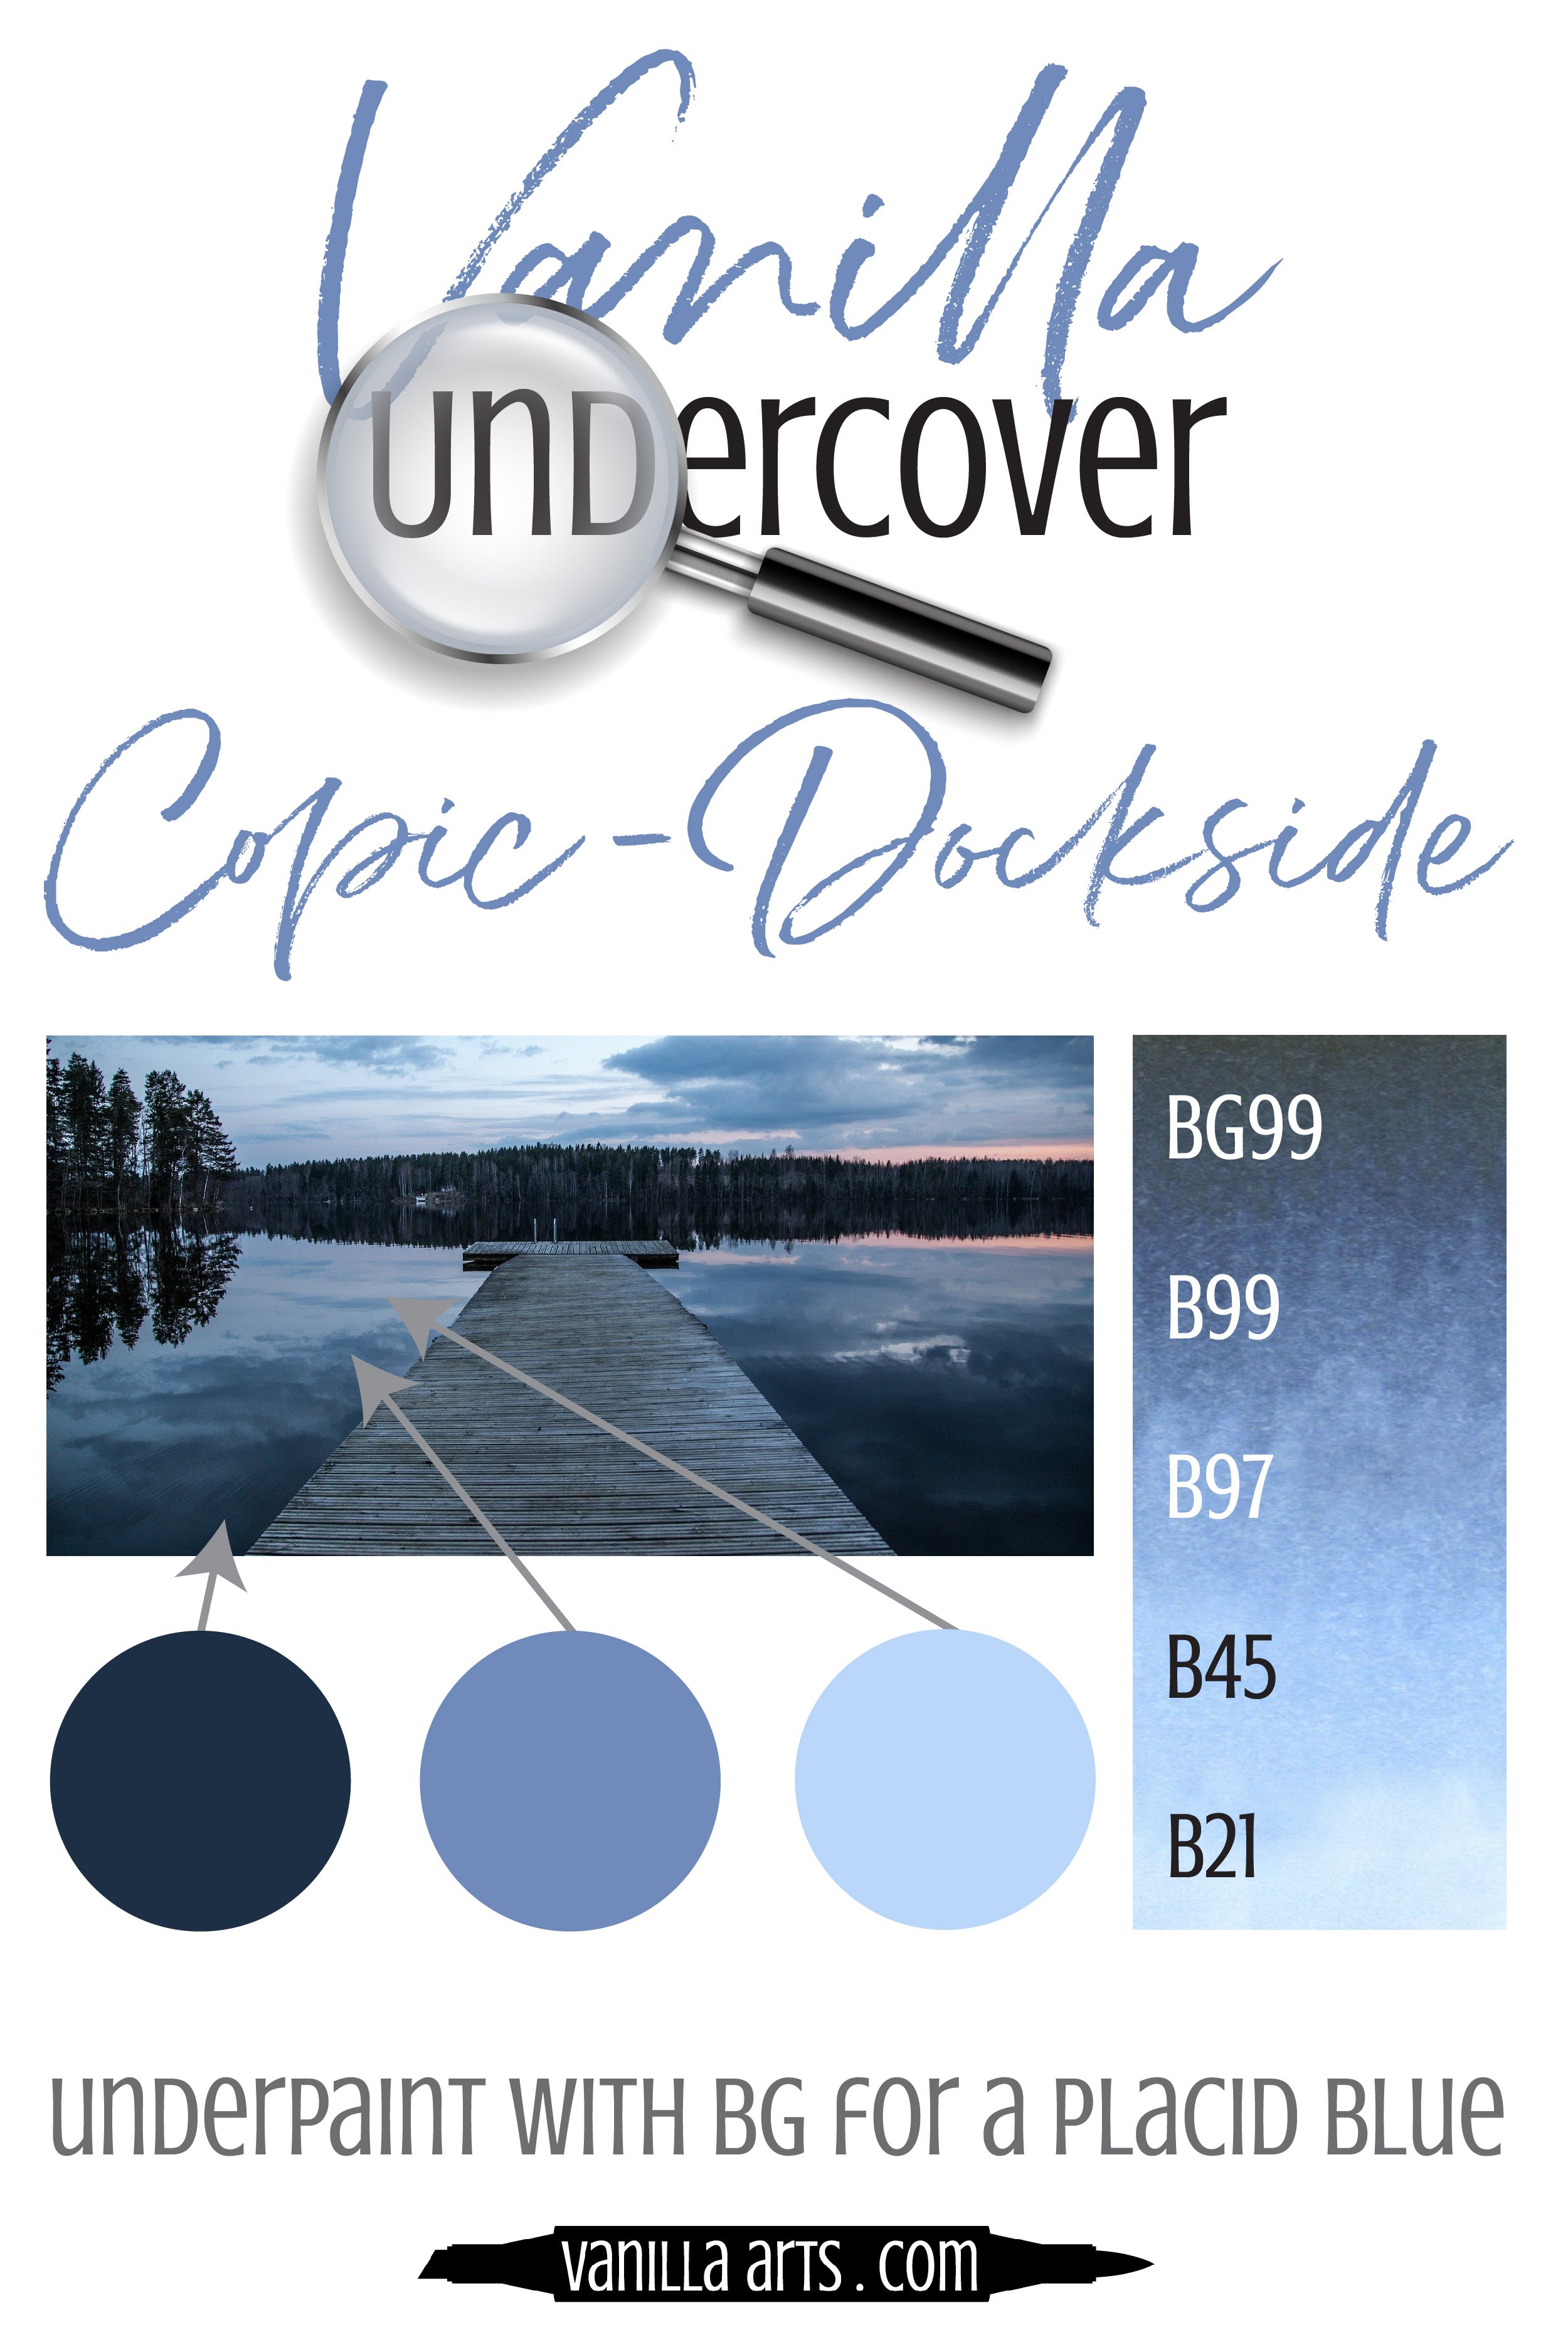 Copic Marker Underpaint: Blending Combinations for Realistic Color